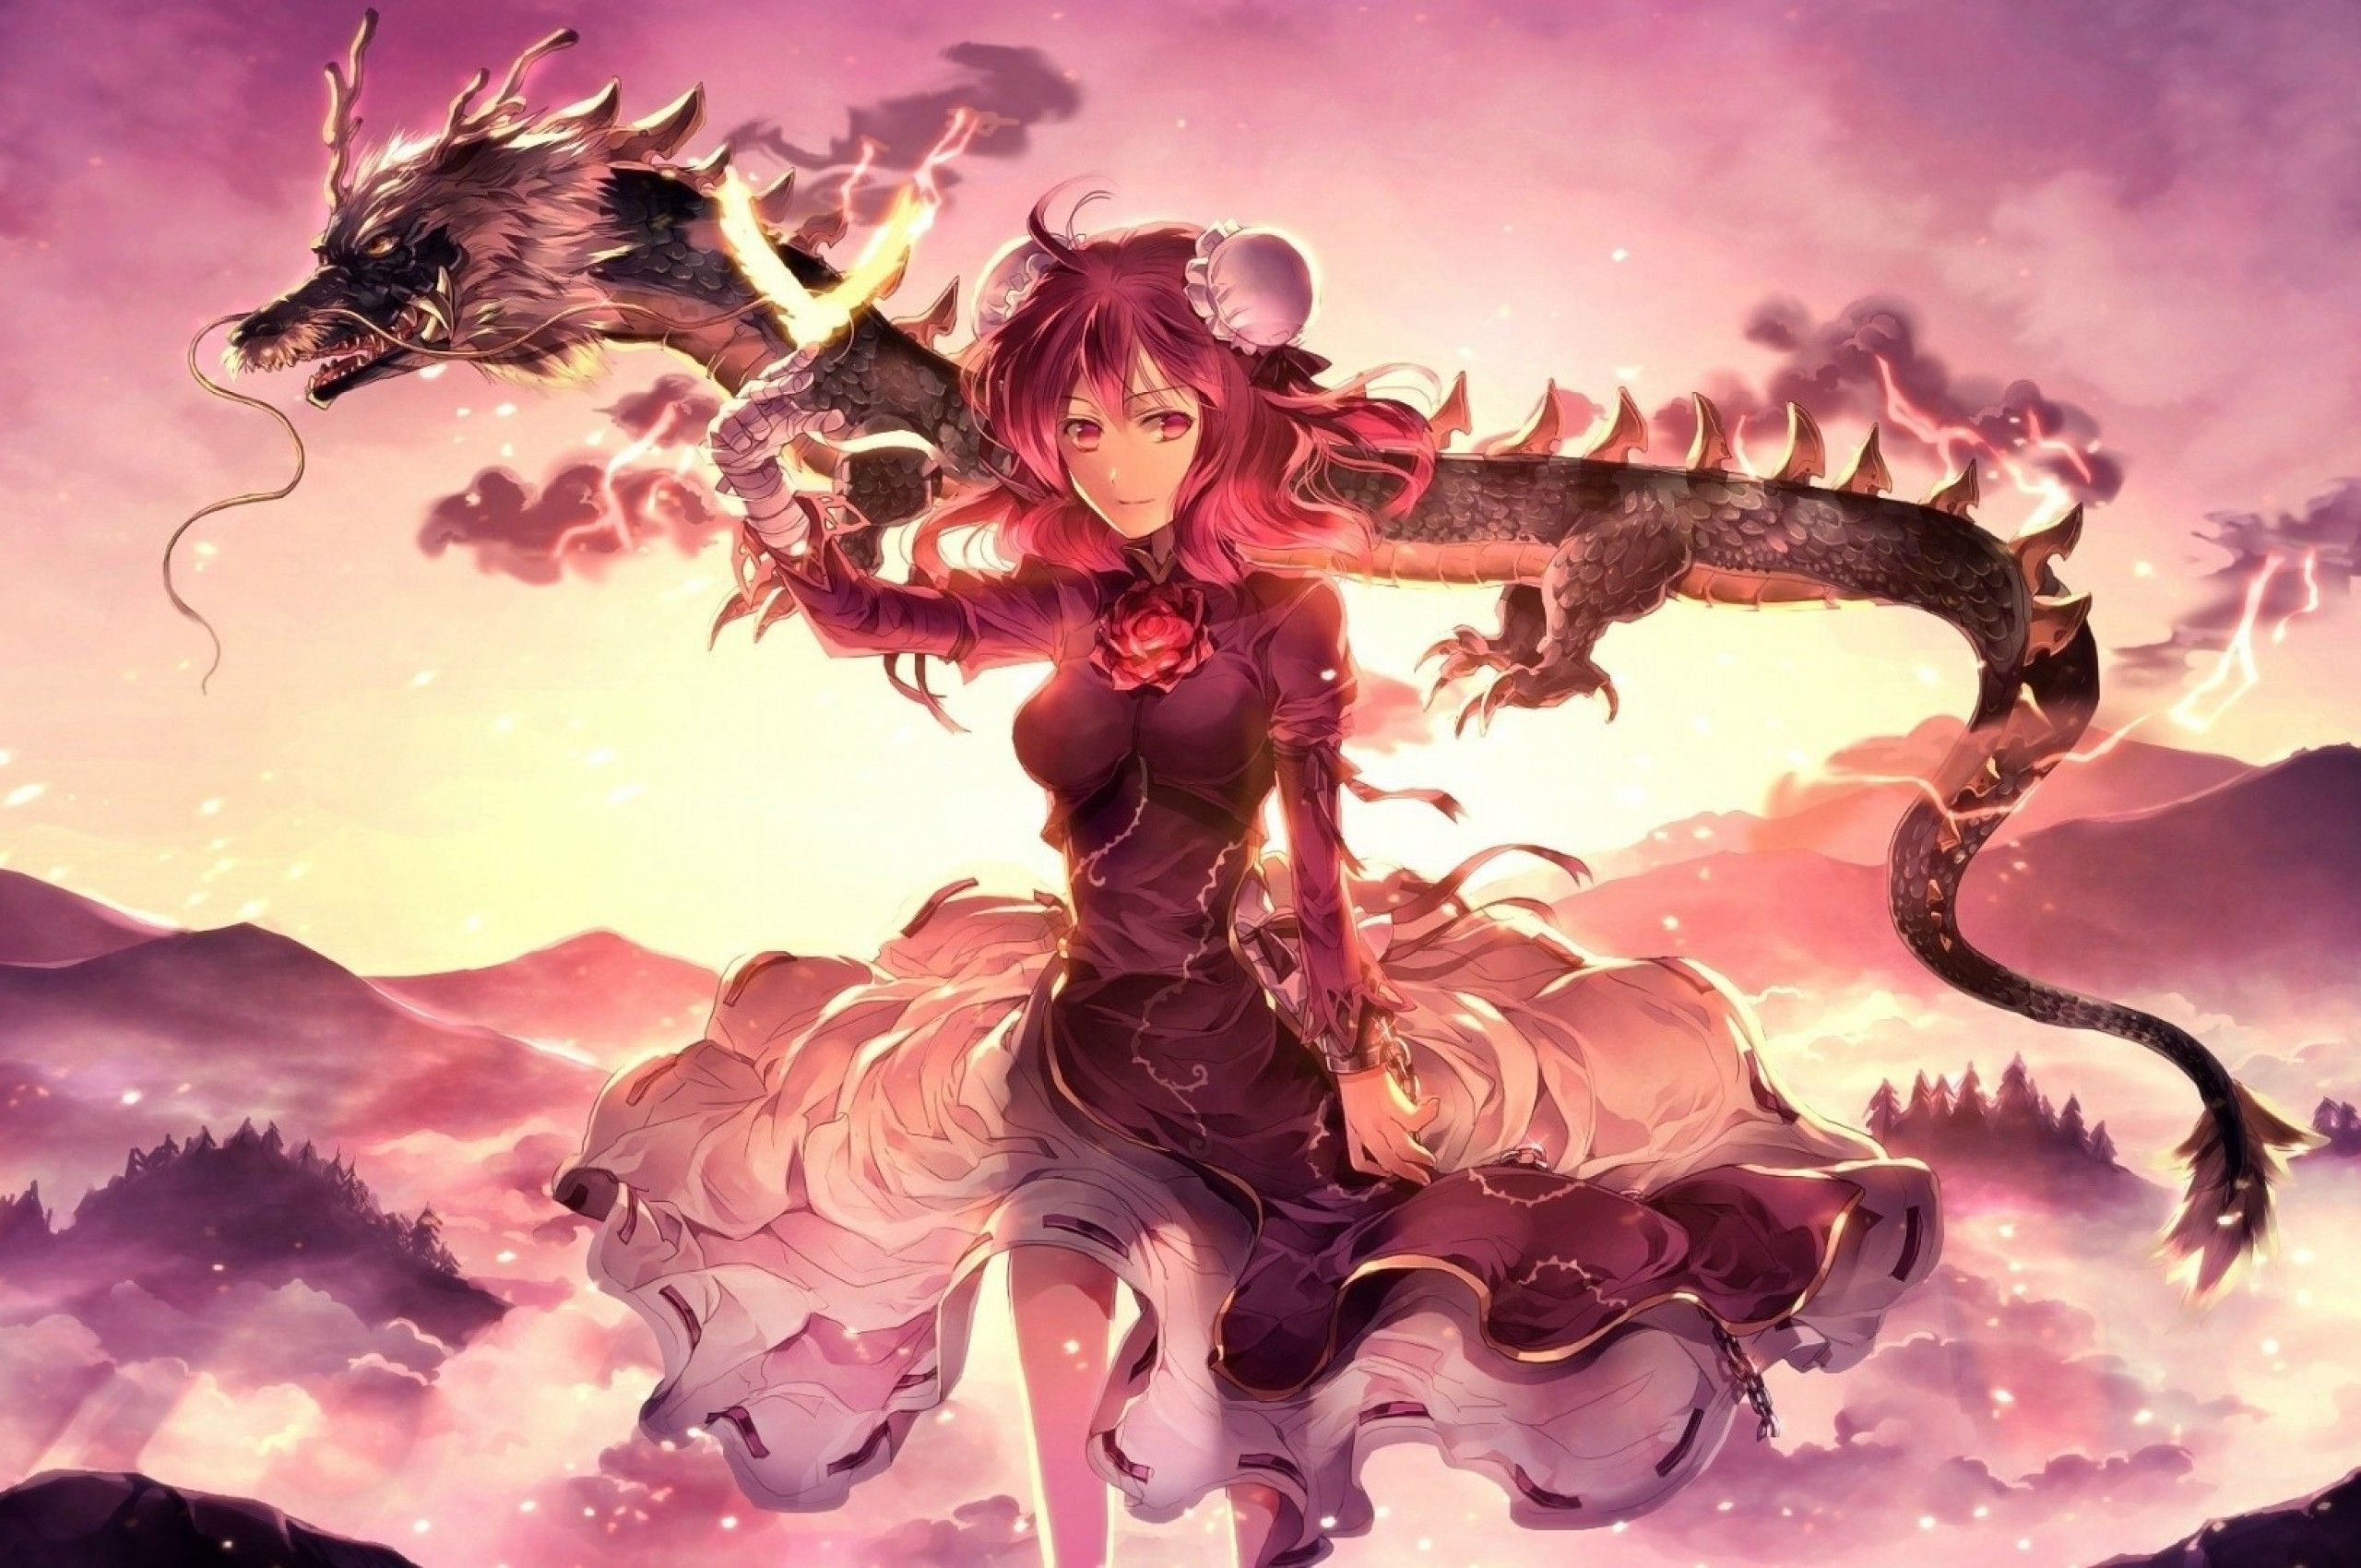 Download 2560x1700 Anime Girl, Chinese Dragon, Dress, Sunset, Bandage Wallpapers for Chromebook Pixel